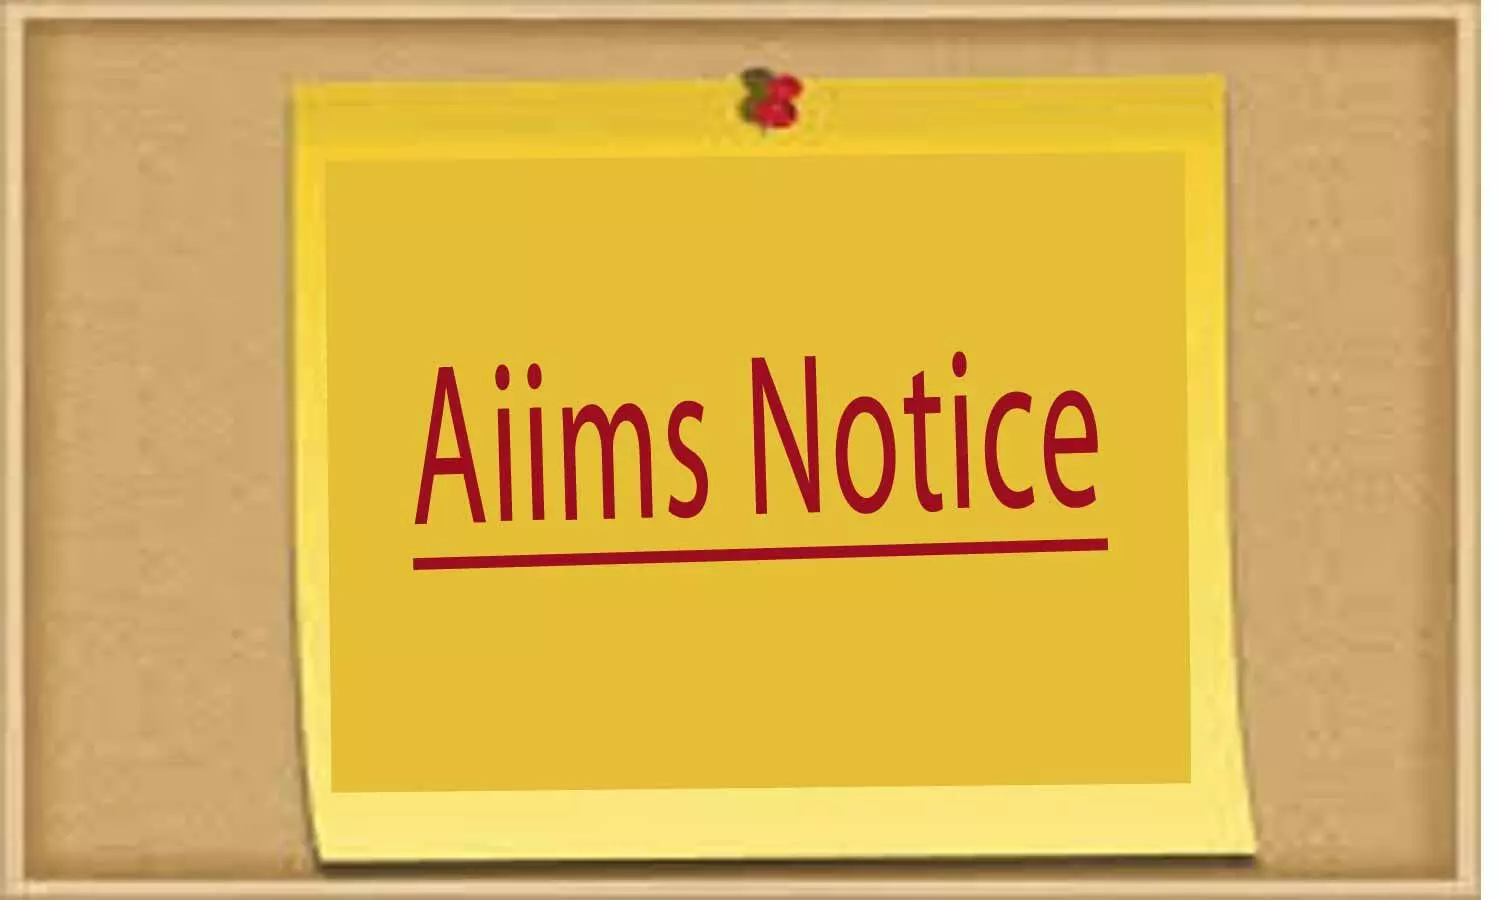 AIIMS BSc Nursing Post Basic, MSc Nursing: Uploading Of Admit Card delayed due to COVID 19